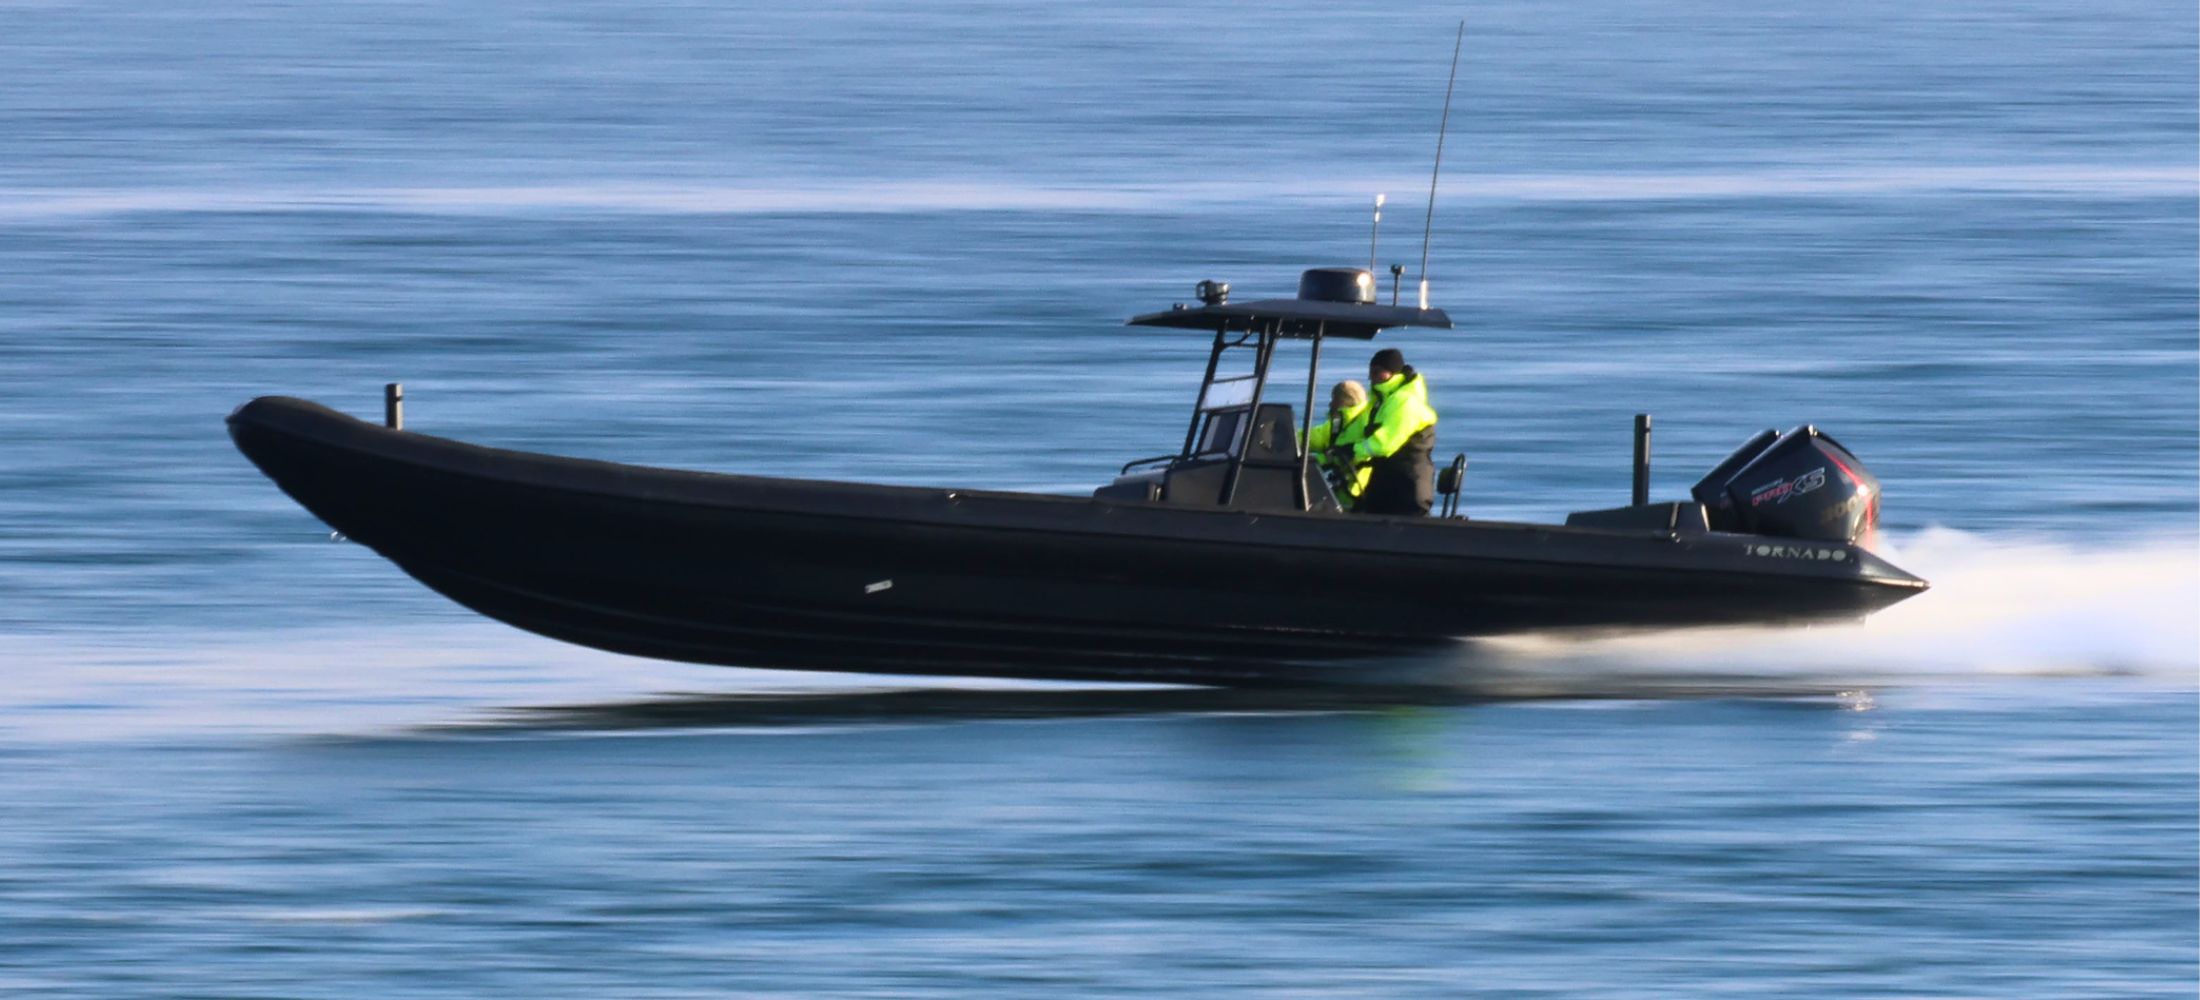 11m-tornado-rib-support-boat-for-large-vessel